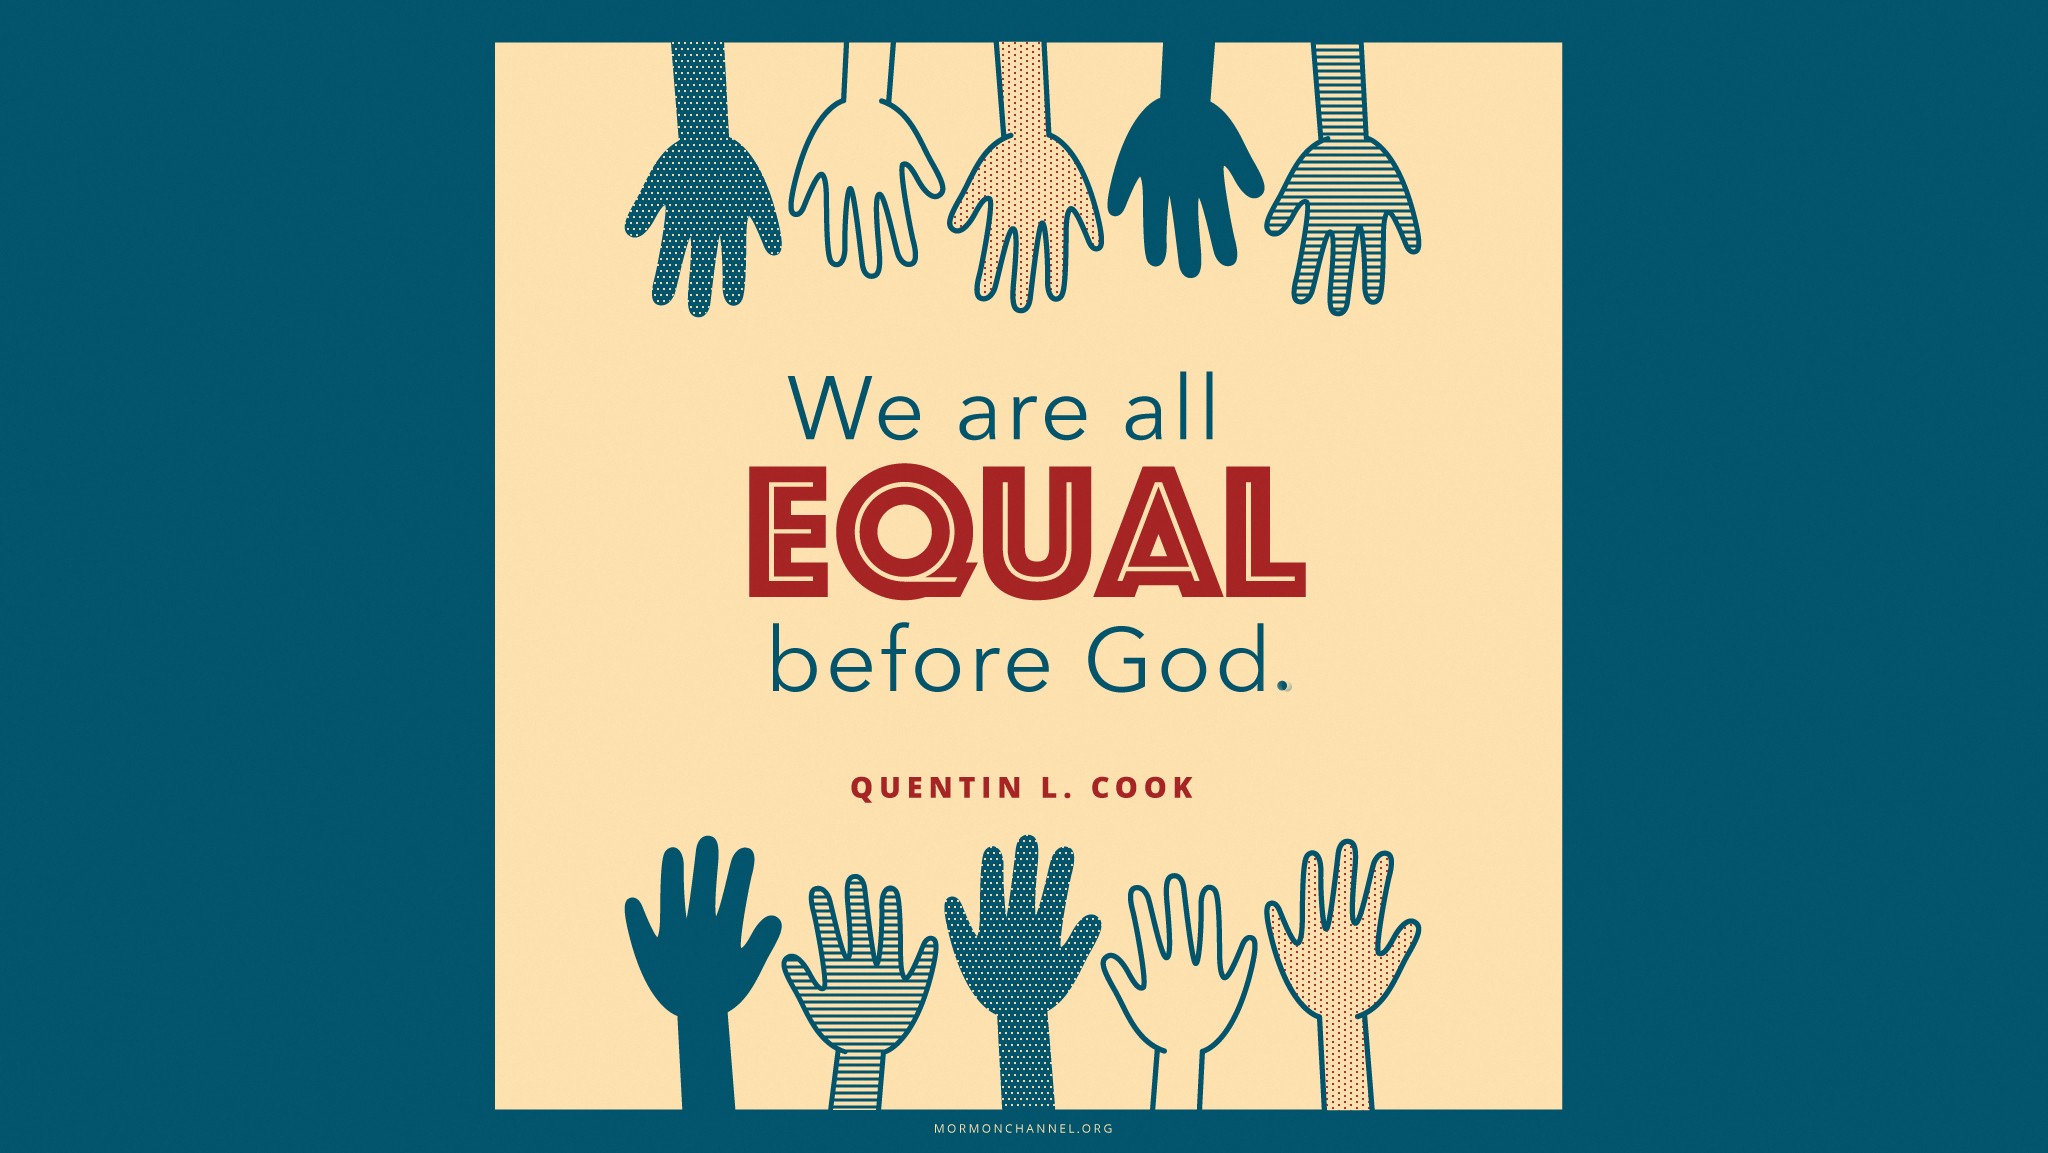 An illustration of 10 hands in different shades with a quote by Elder Quentin L. Cook: “We are all equal before God.”